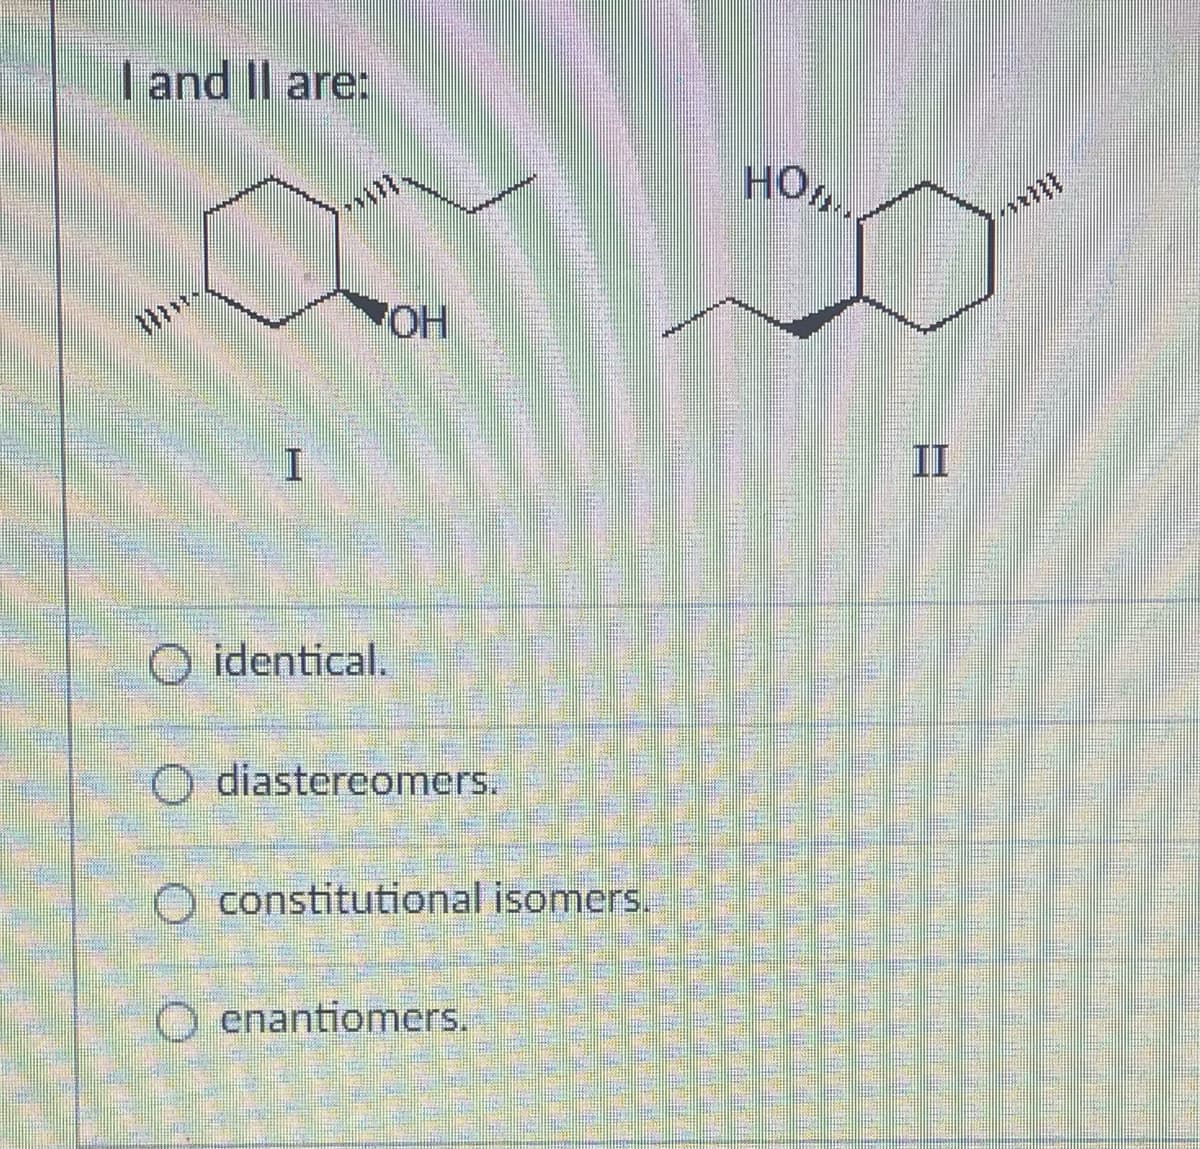 I and II are:
Mw
I
O identical.
OH
O diastereomers.
constitutional isomers.
Oenantiomers.
НО....
***